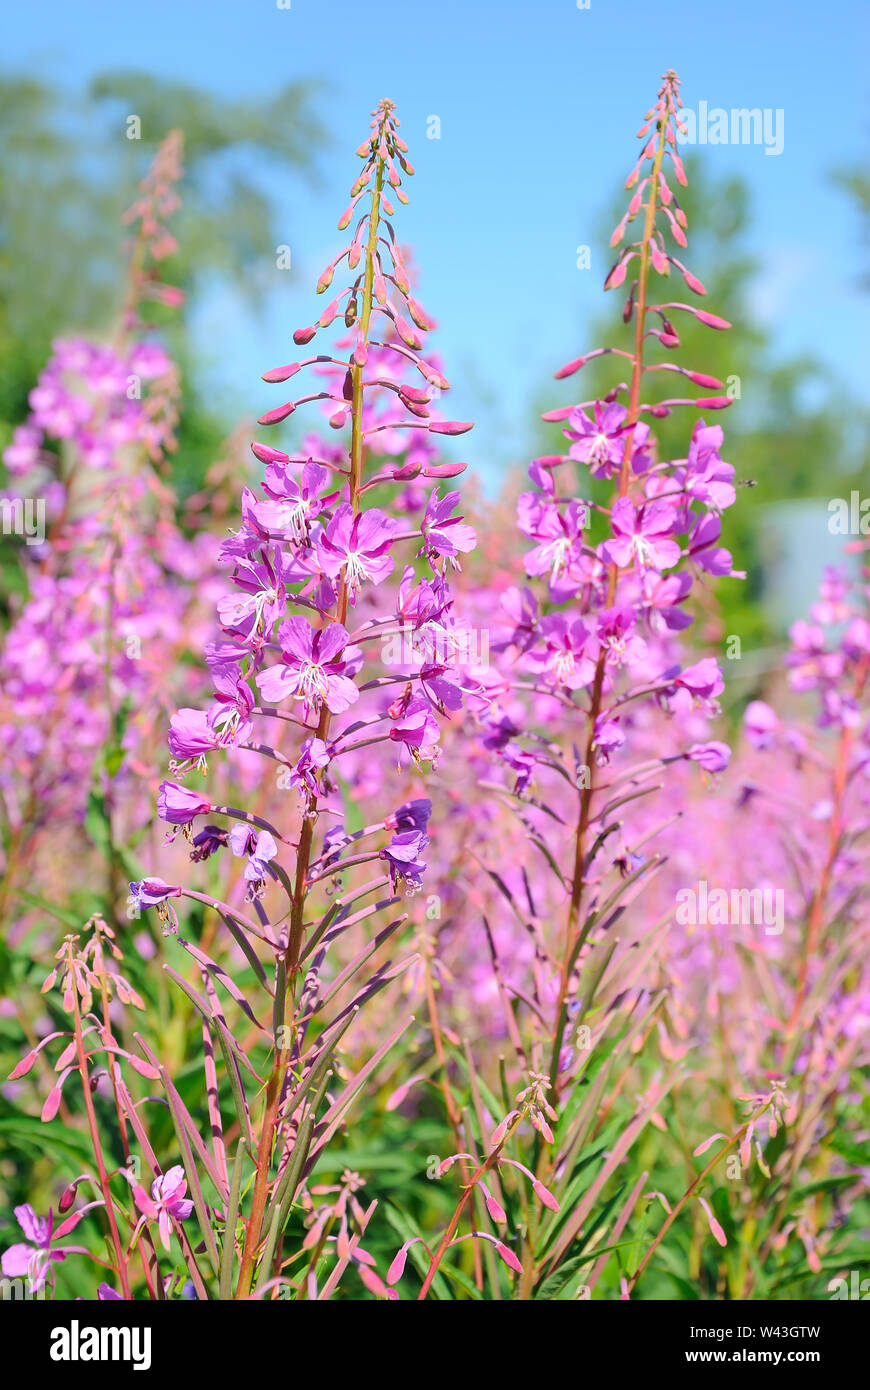 Chamerion angustifolium flowers grows outdoors, close up Stock Photo